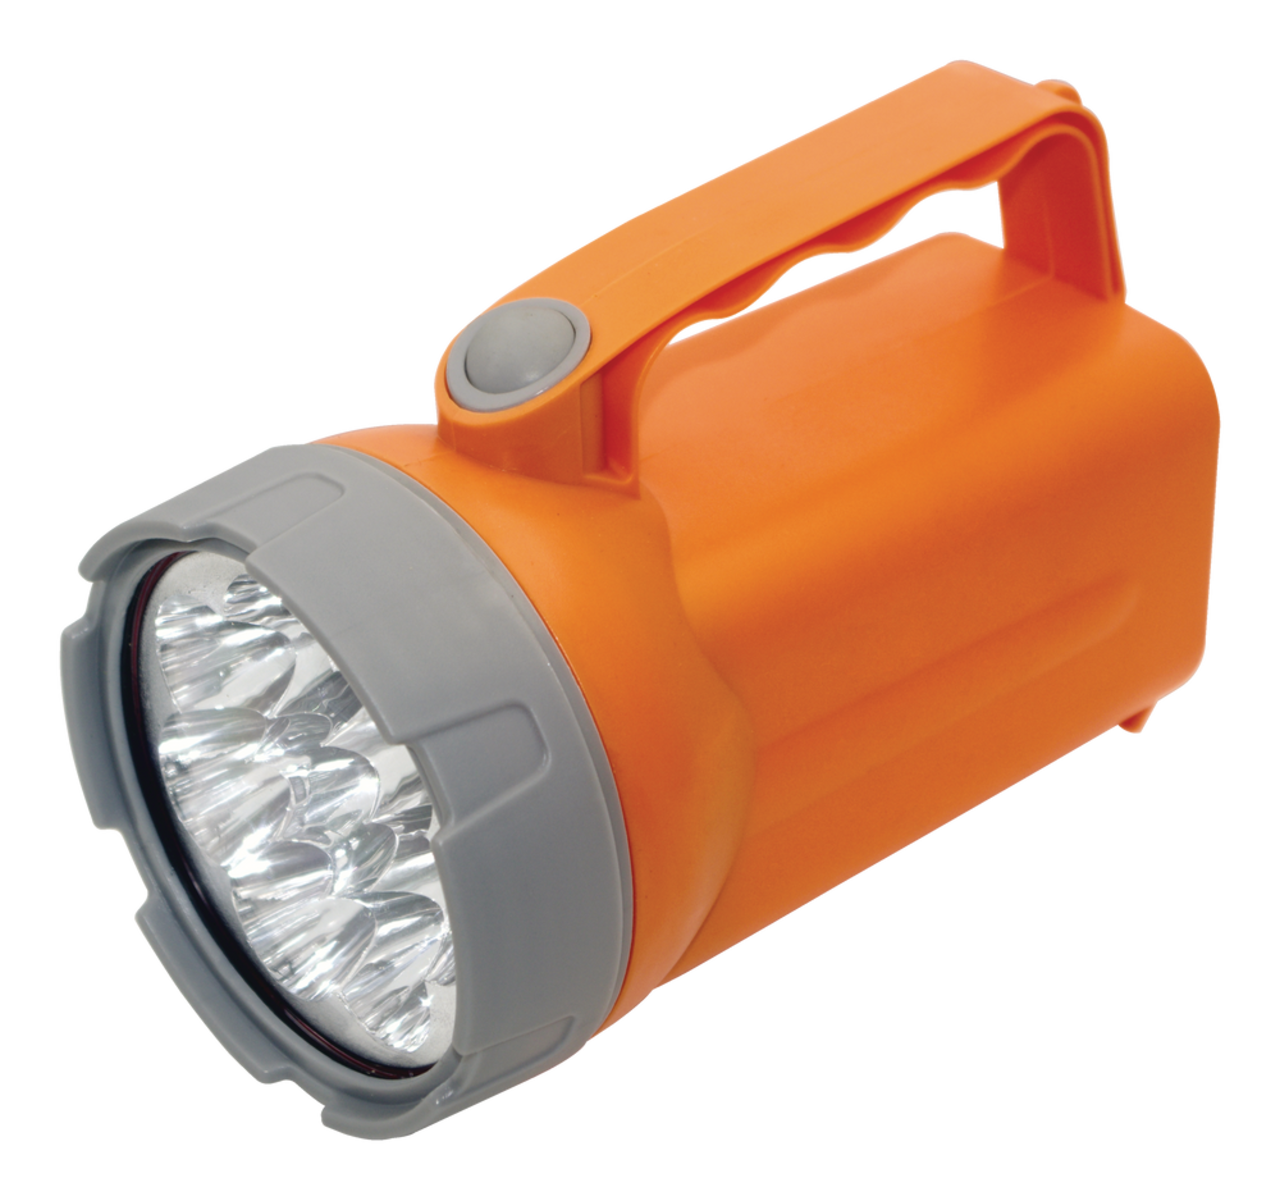 https://media-www.canadiantire.ca/product/fixing/hardware/household-flashlights/0650004/certified-6v-led-floating-lantern-ff92b6a0-9ee7-4947-8a5b-70e00d7f73f9.png?imdensity=1&imwidth=640&impolicy=mZoom